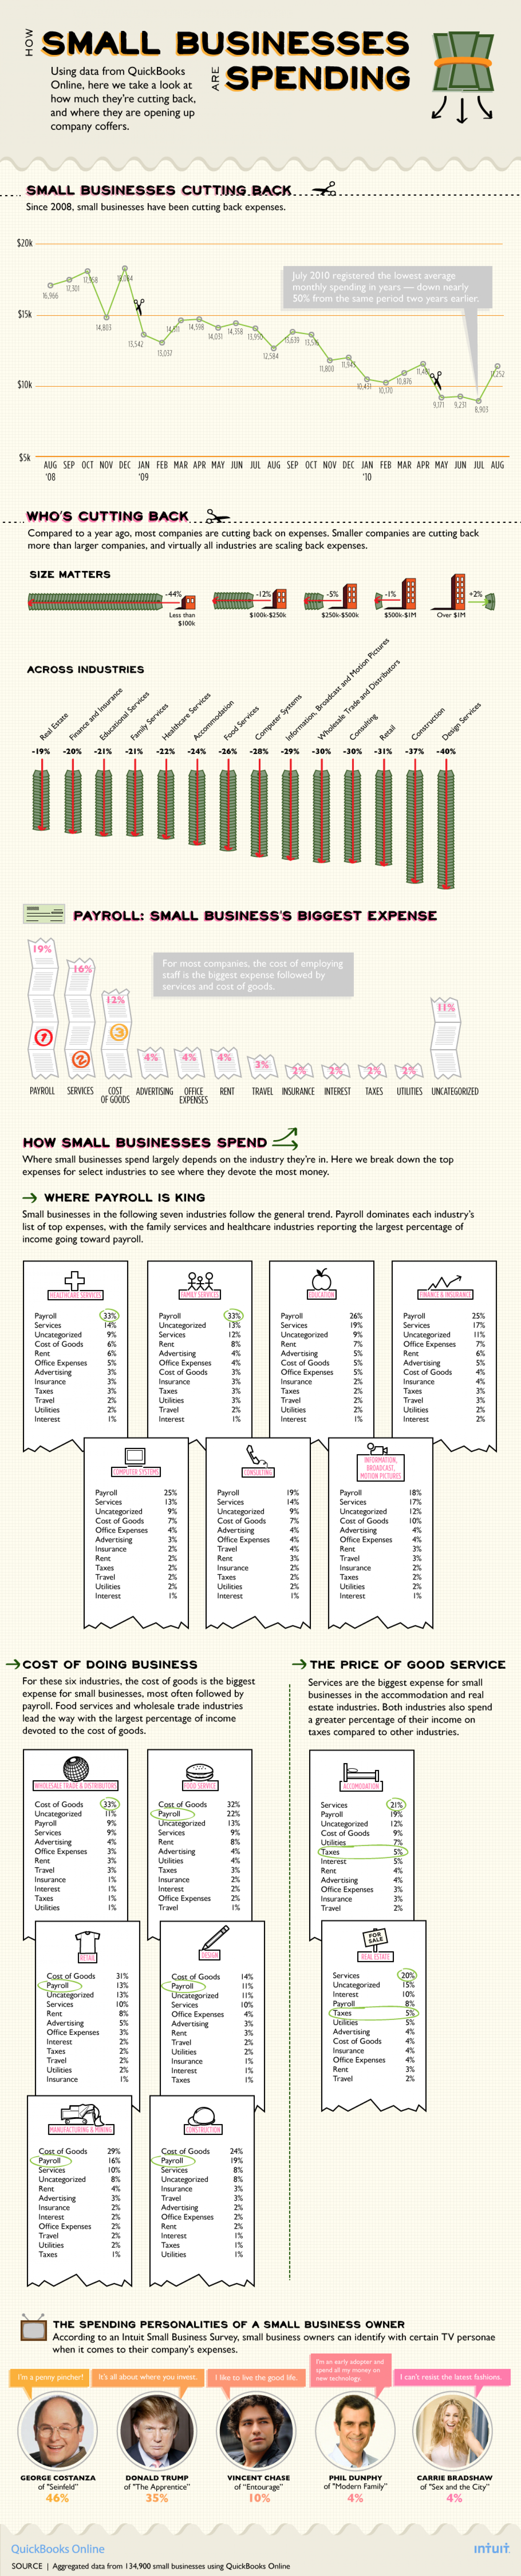 How Small Businesses Are Spending Infographic